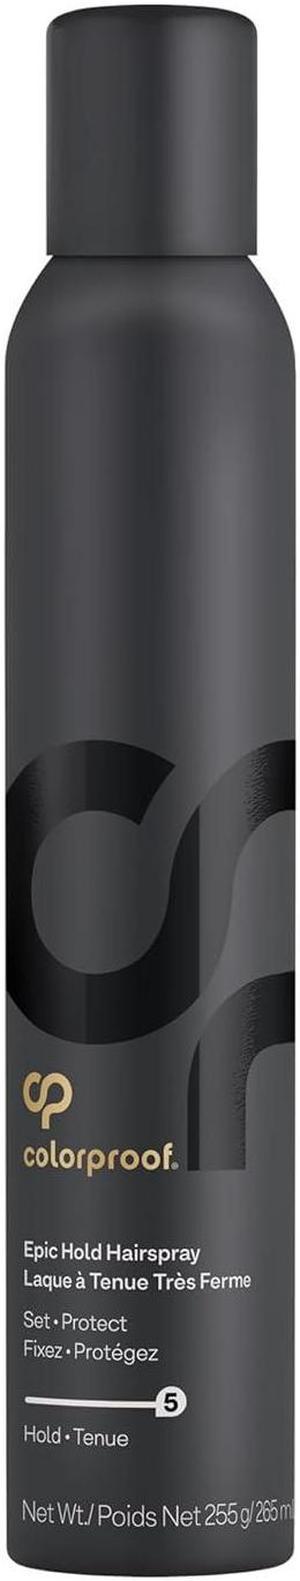 ColorProof Epic Hold Hairspray 9oz